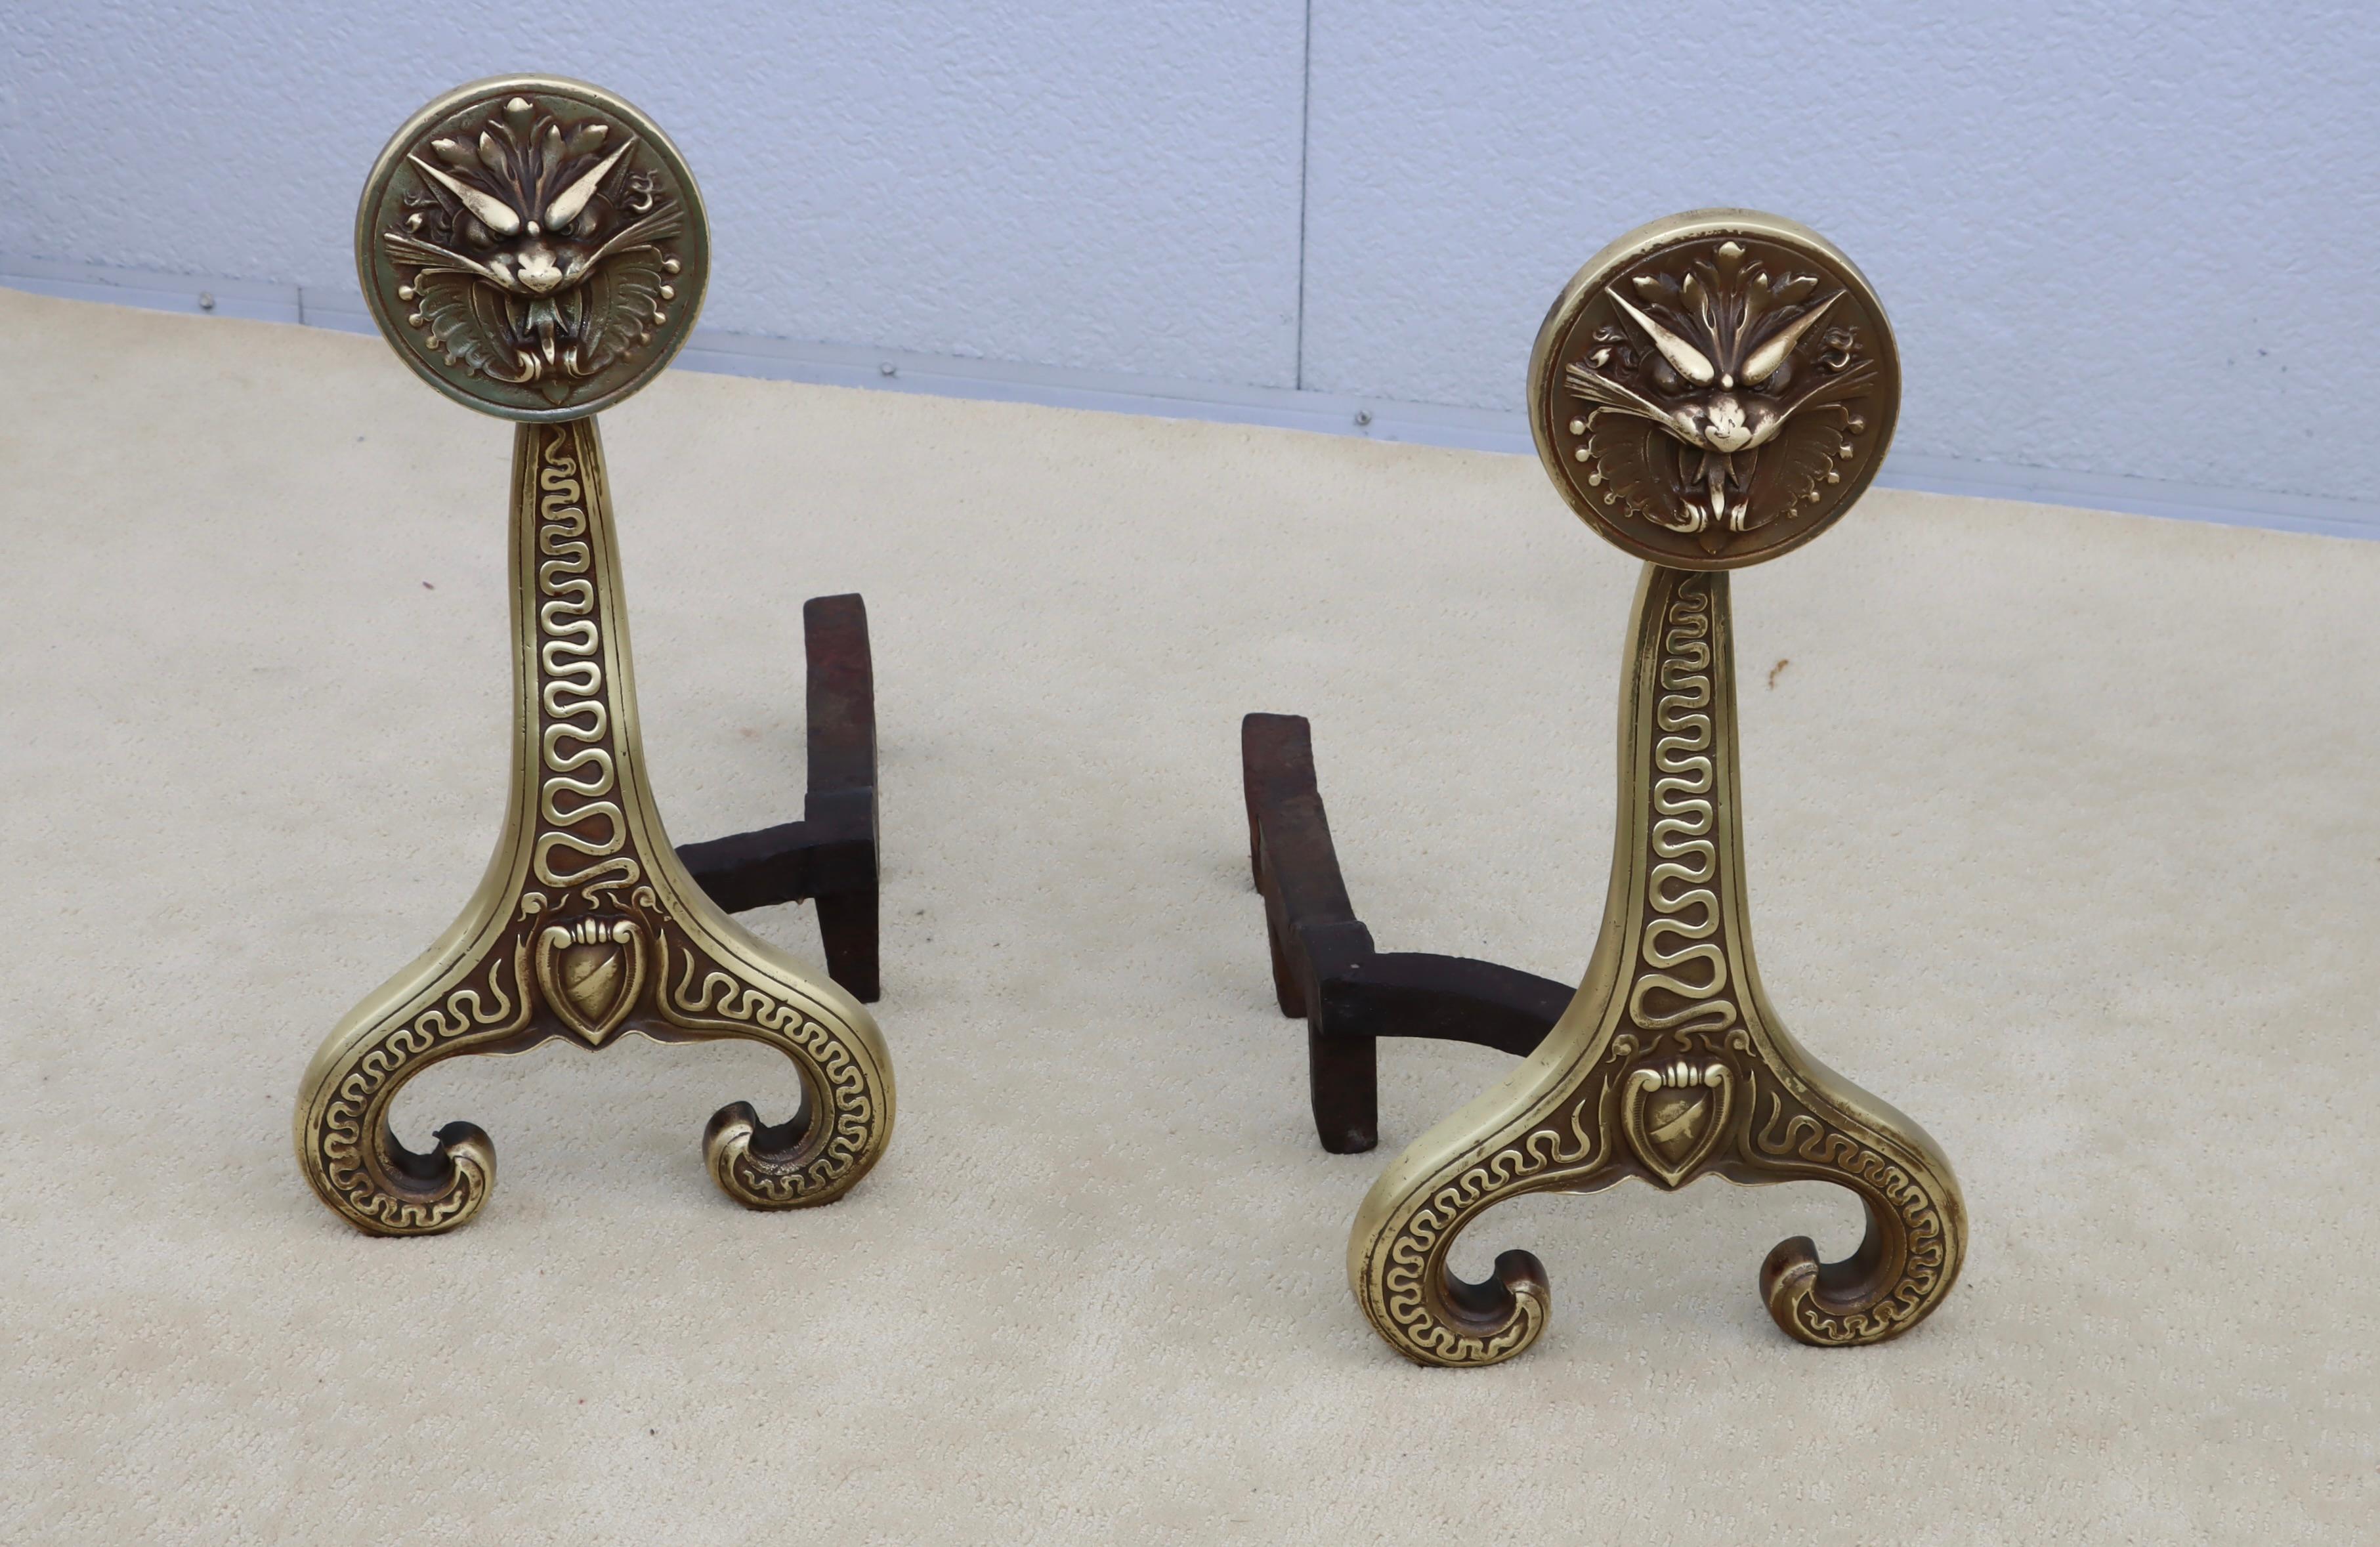 Amazing pair of 1886 solid brass and iron andirons by Bradley & Hubbard, in vintage condition with some wear and patina to the brass due to age and use, the brass was lightly hand polished.